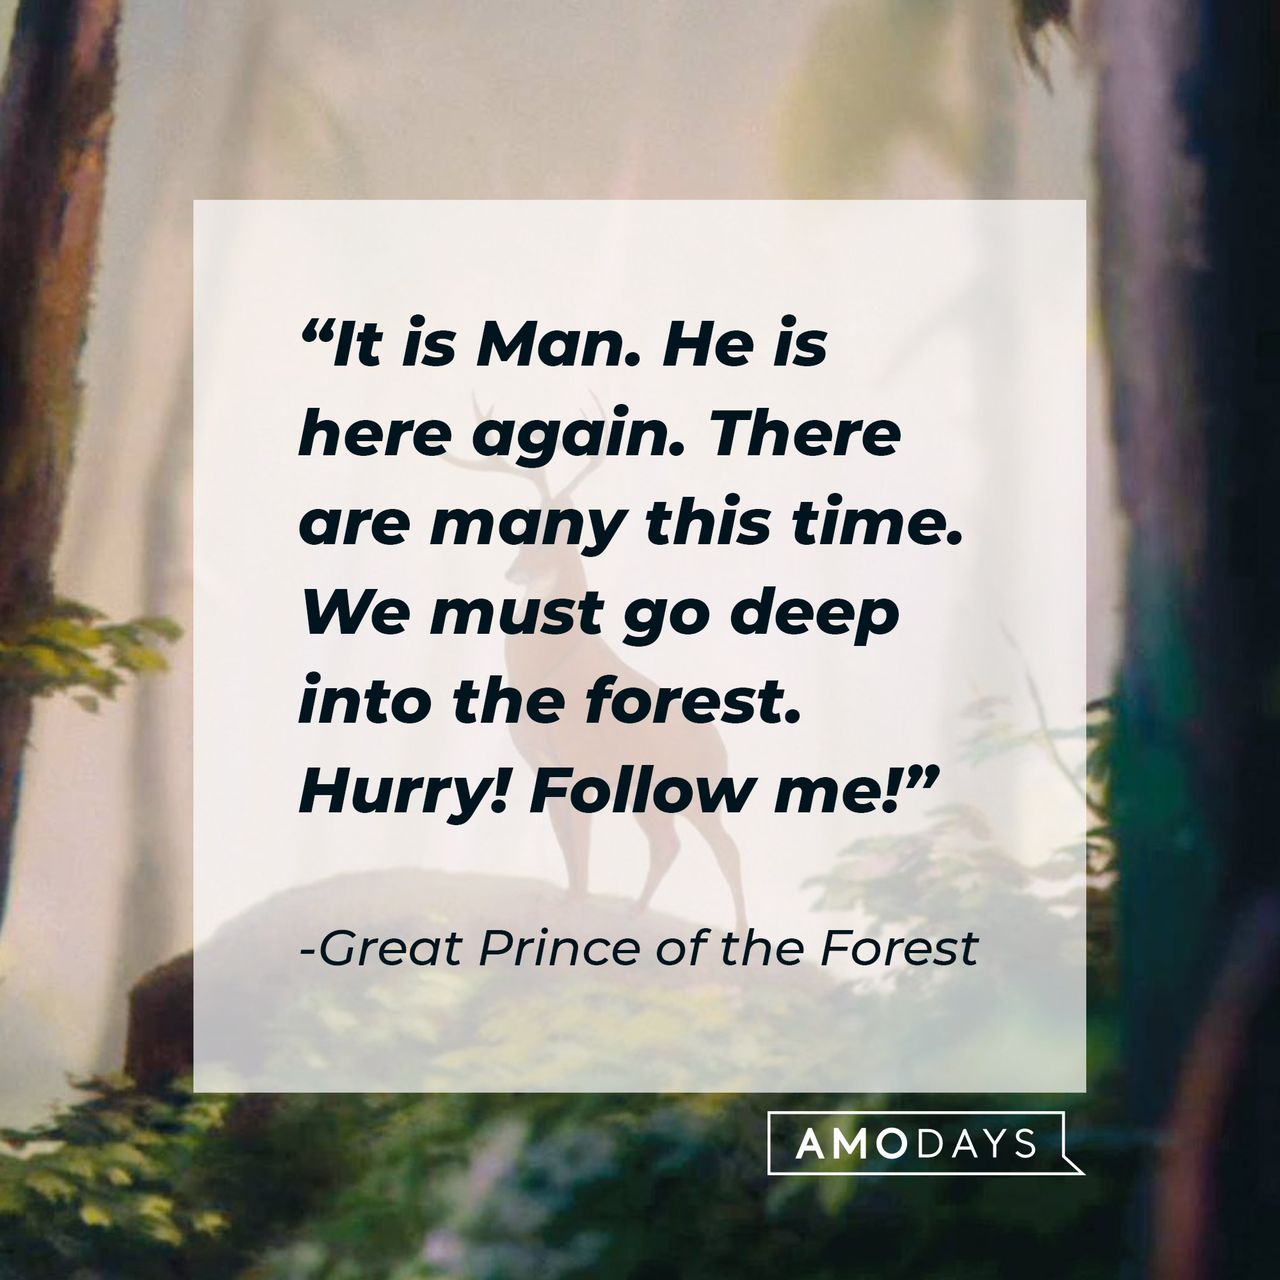 Great Prince of the Forest's quote "It is Man. He is here again. There are many this time. We must go deep into the forest. Hurry! Follow me!" | Source: facebook.com/DisneyBambi